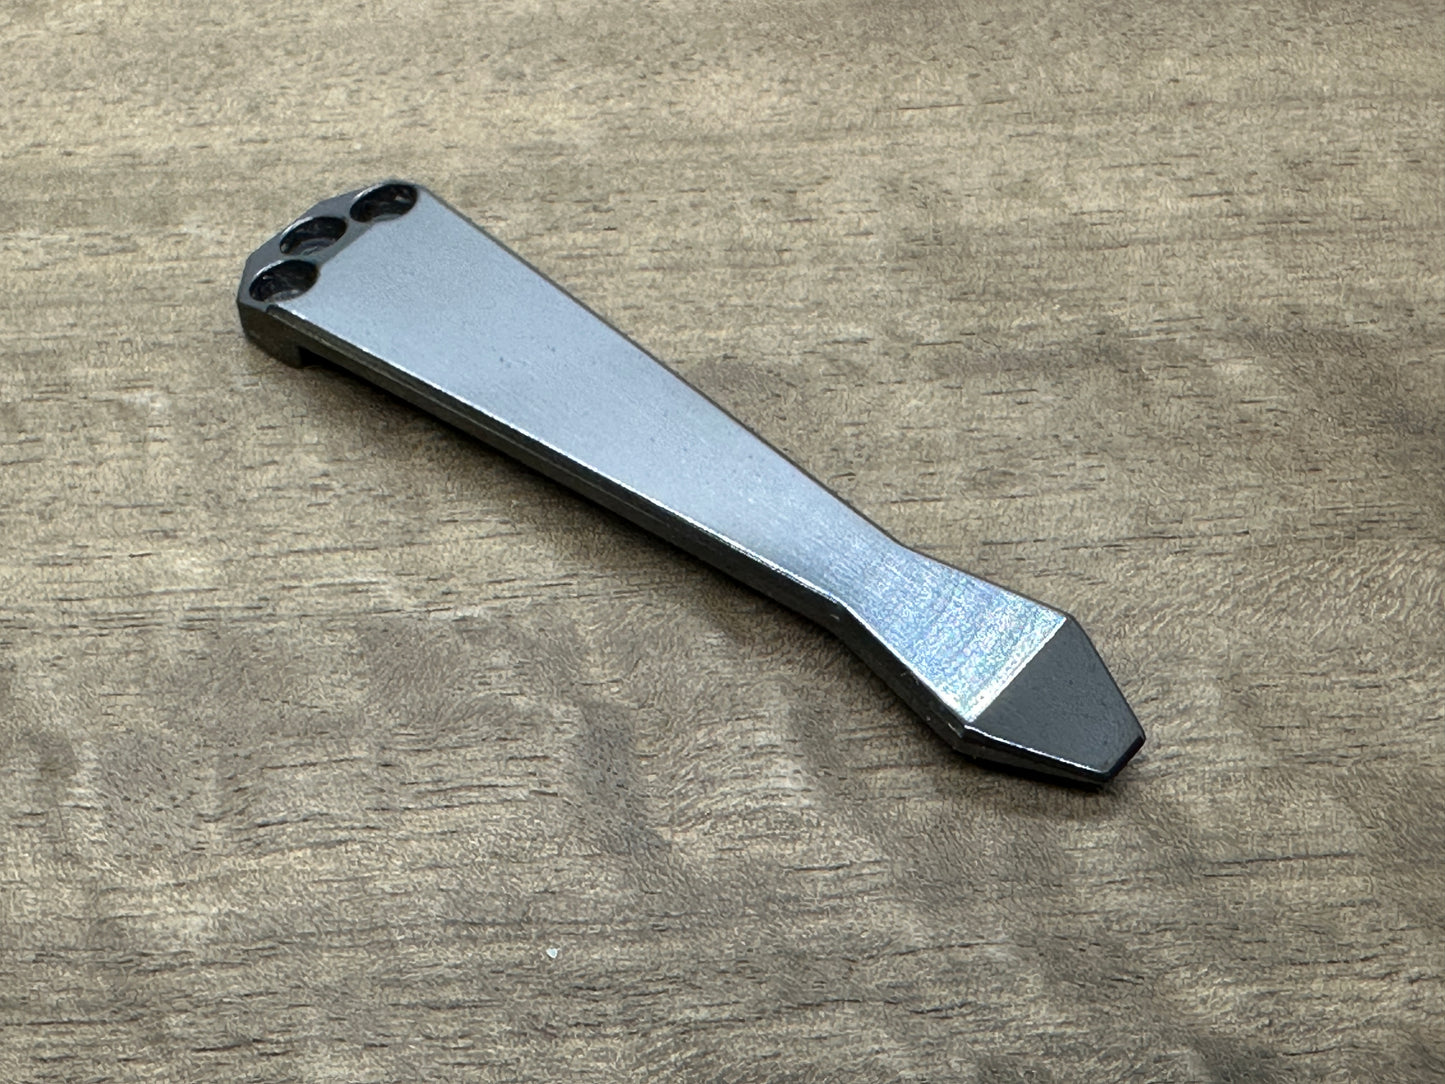 Polished Zirconium Dmd CLIP for most Benchmade models